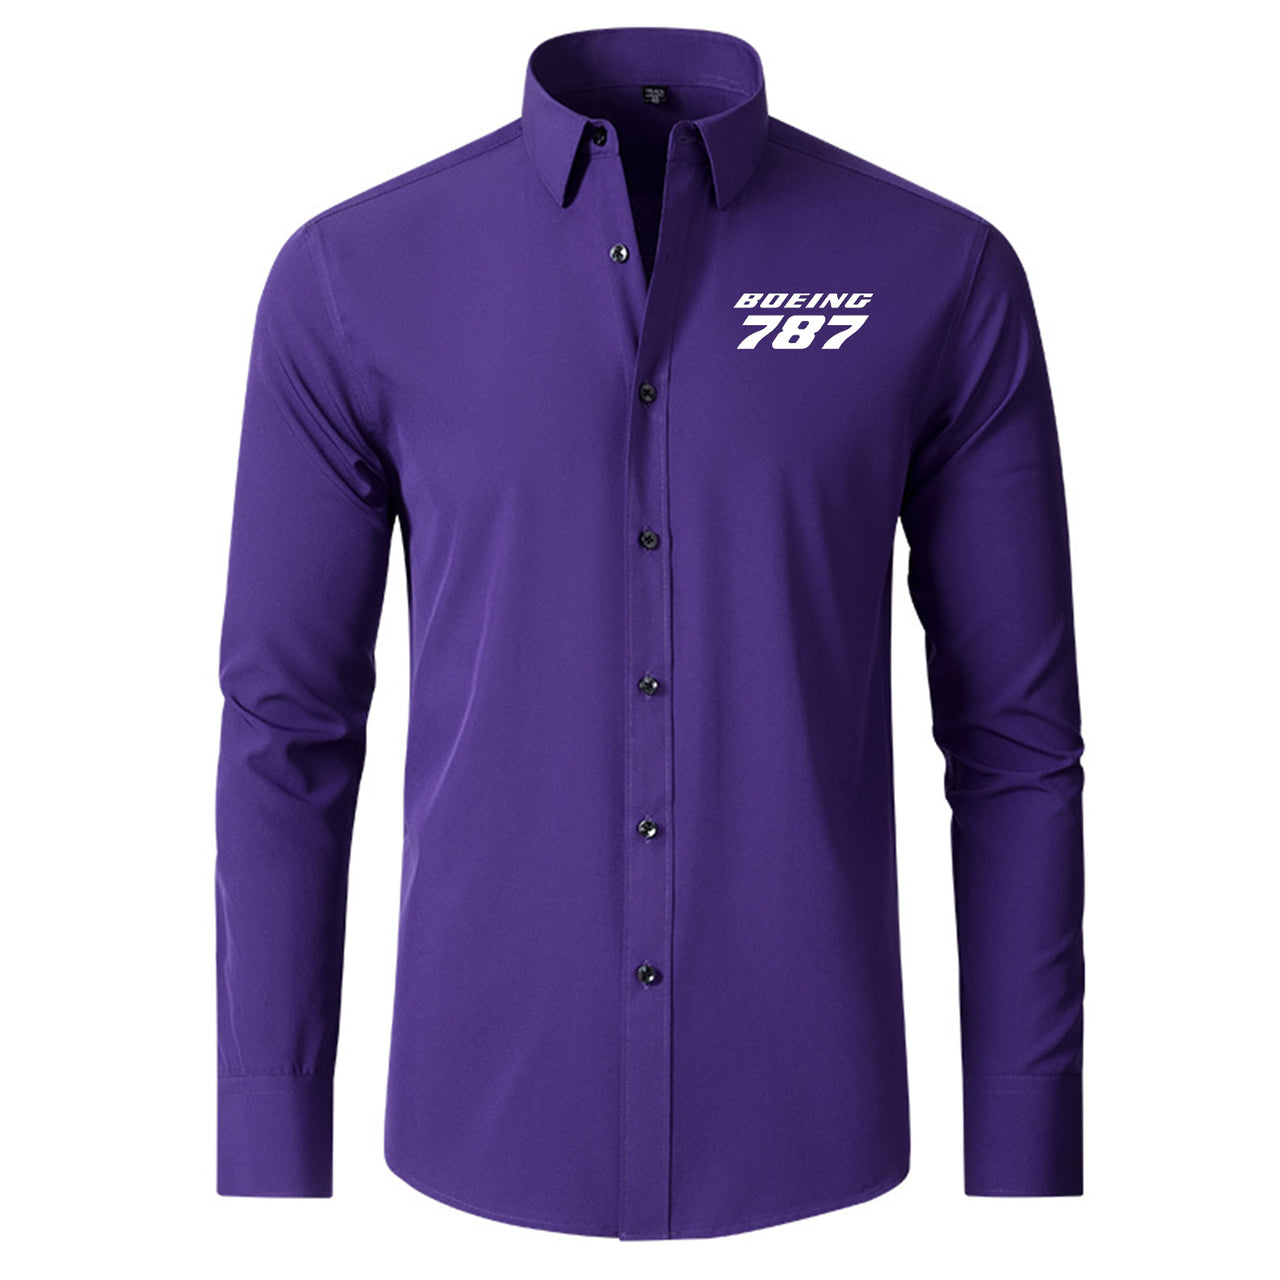 Boeing 787 & Text Designed Long Sleeve Shirts